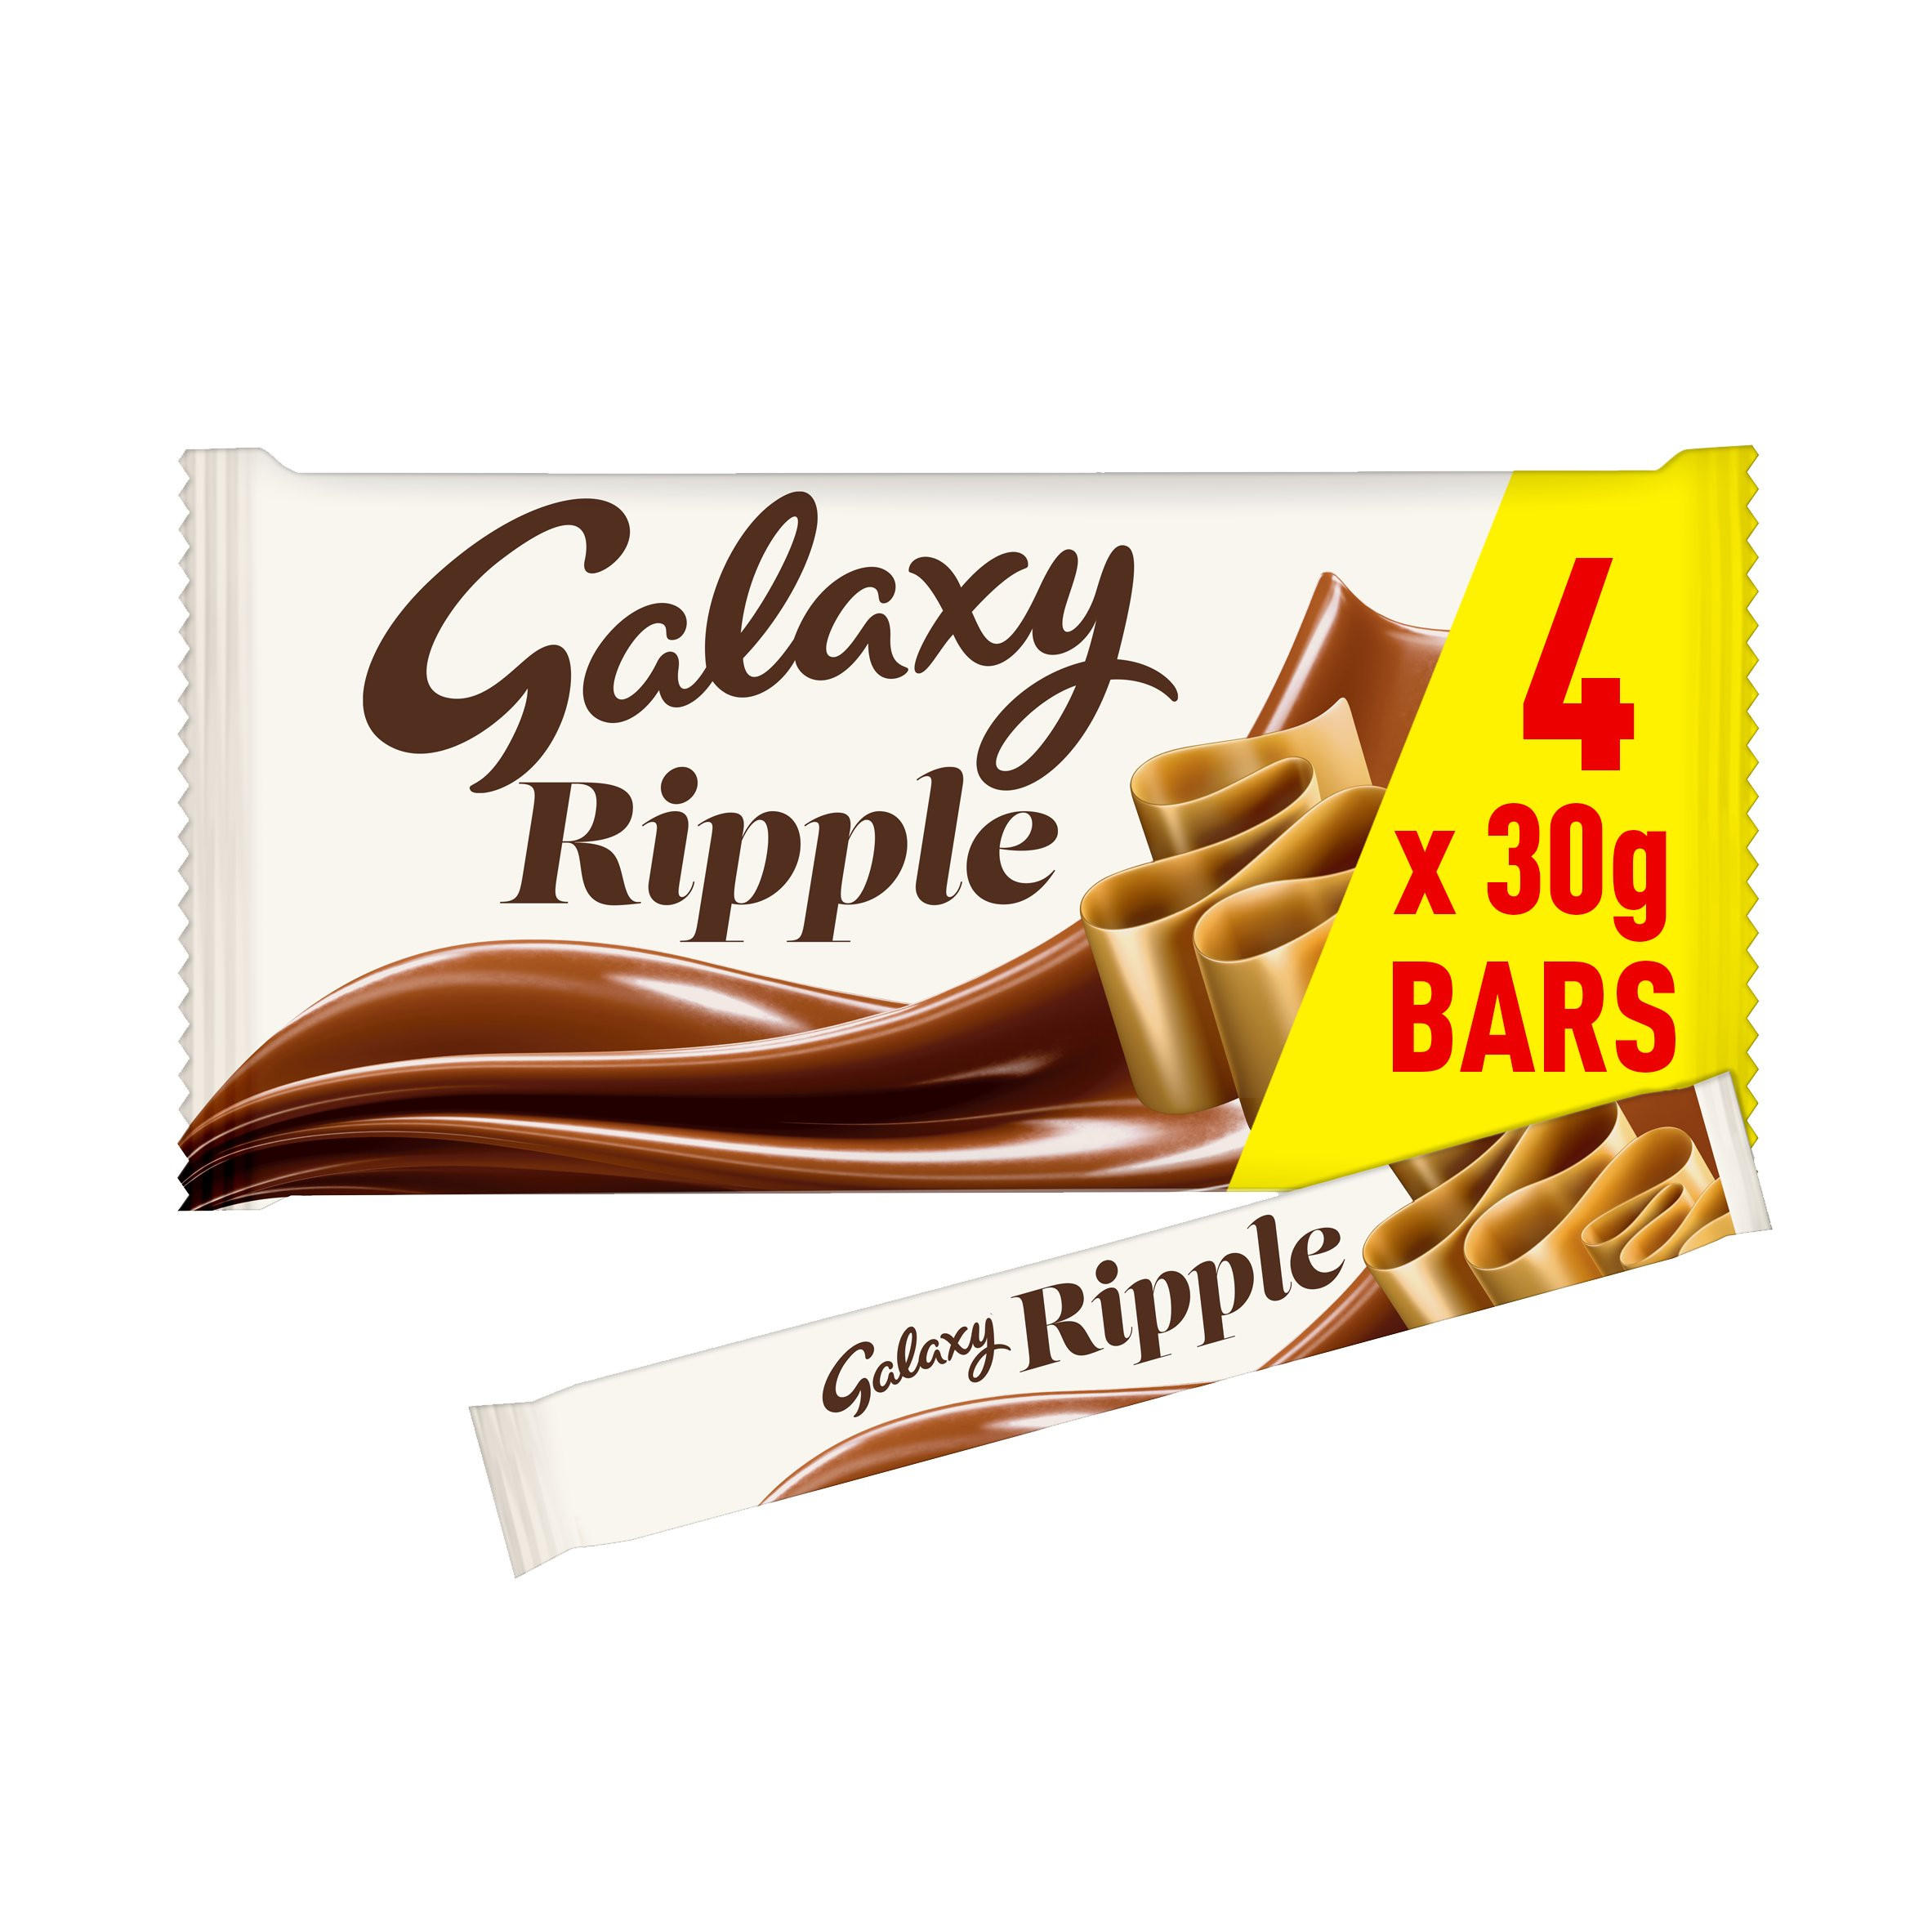 https://assets.iceland.co.uk/i/iceland/galaxy_ripple_chocolate_bars_multipack_4_x_30g_45437_T1.jpg?$pdpzoom$